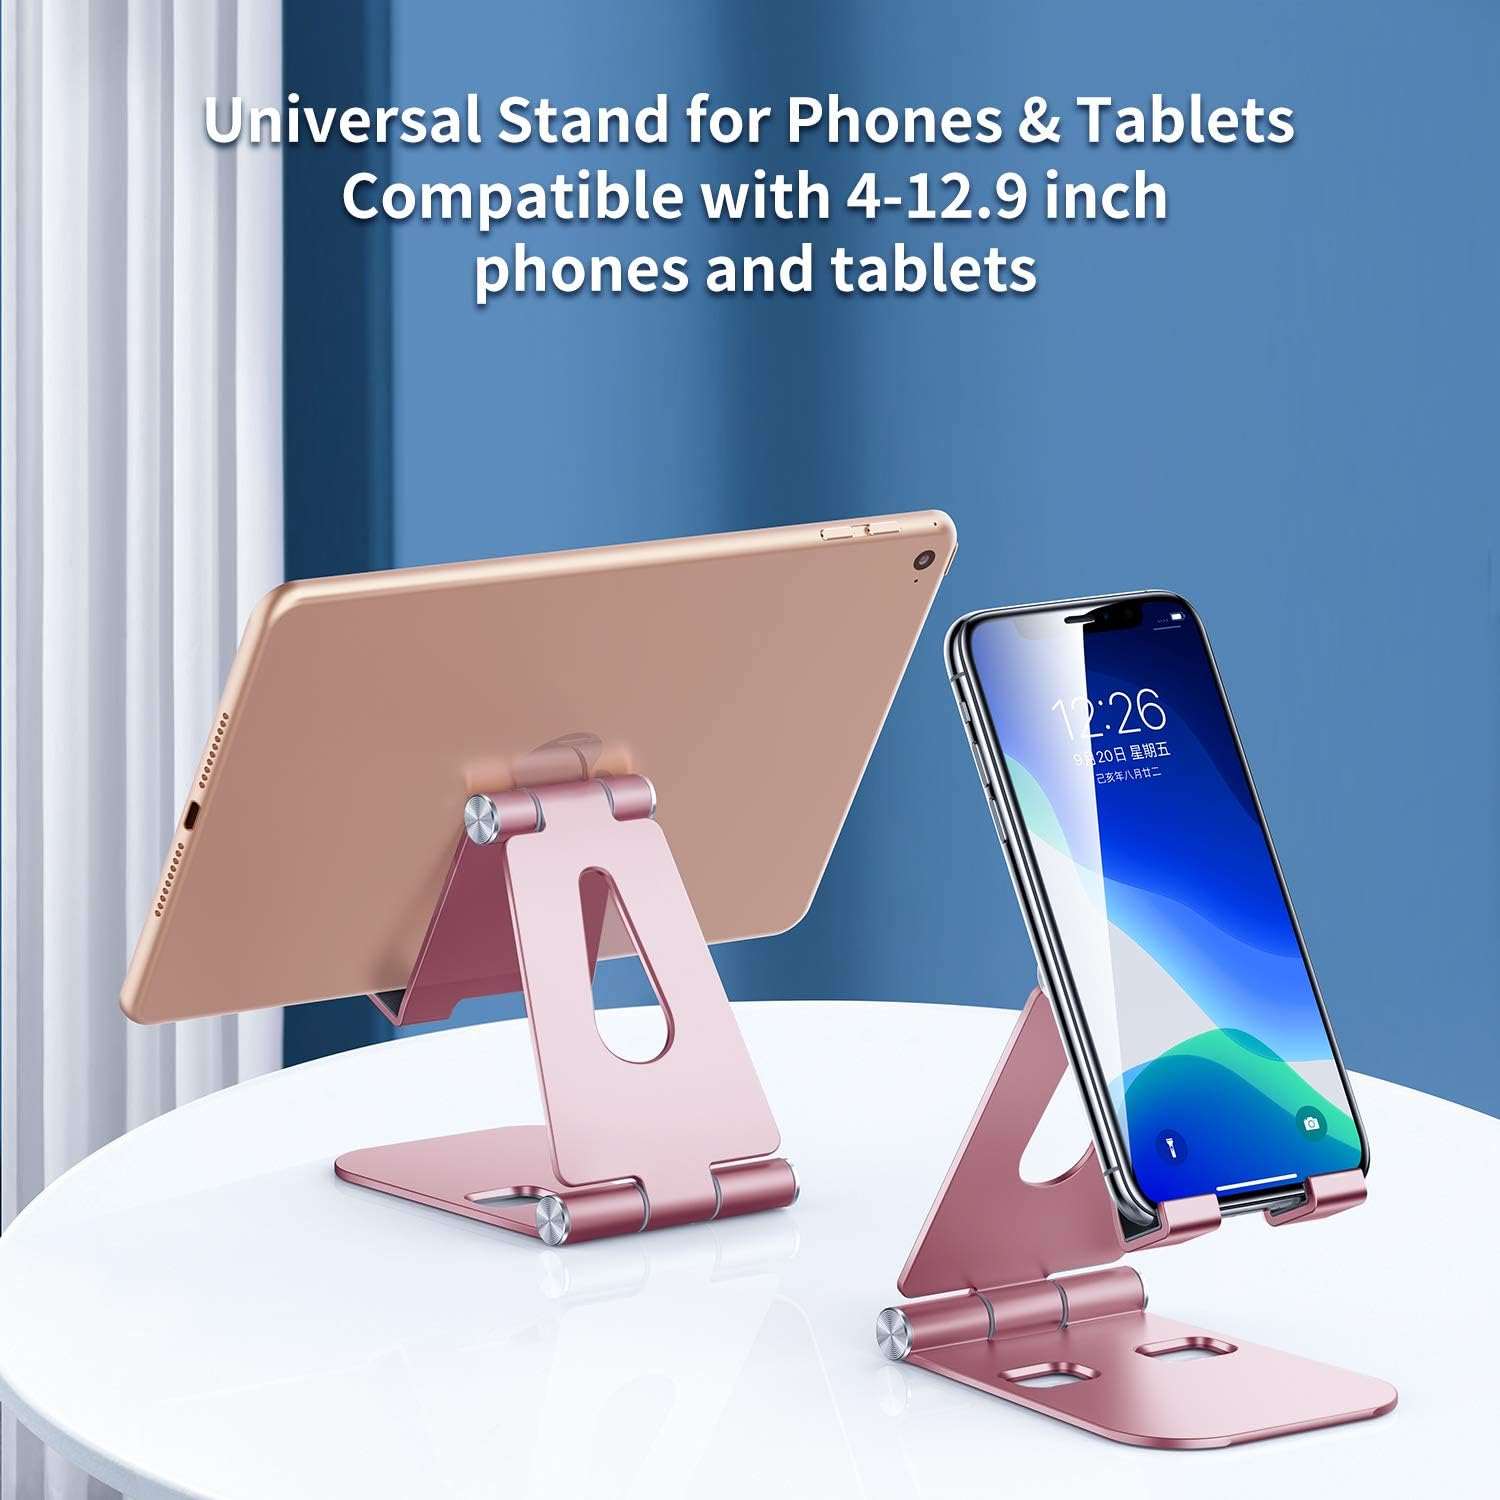 SmartDevil Adjustable Cell Phone Stand, iPhone Desk Stand, Foldable Mobile Phone Stand, Portable iPad Stand Tablet Stand, Universal Aluminum Holder for All Smartphone & Tablets - Rose Gold